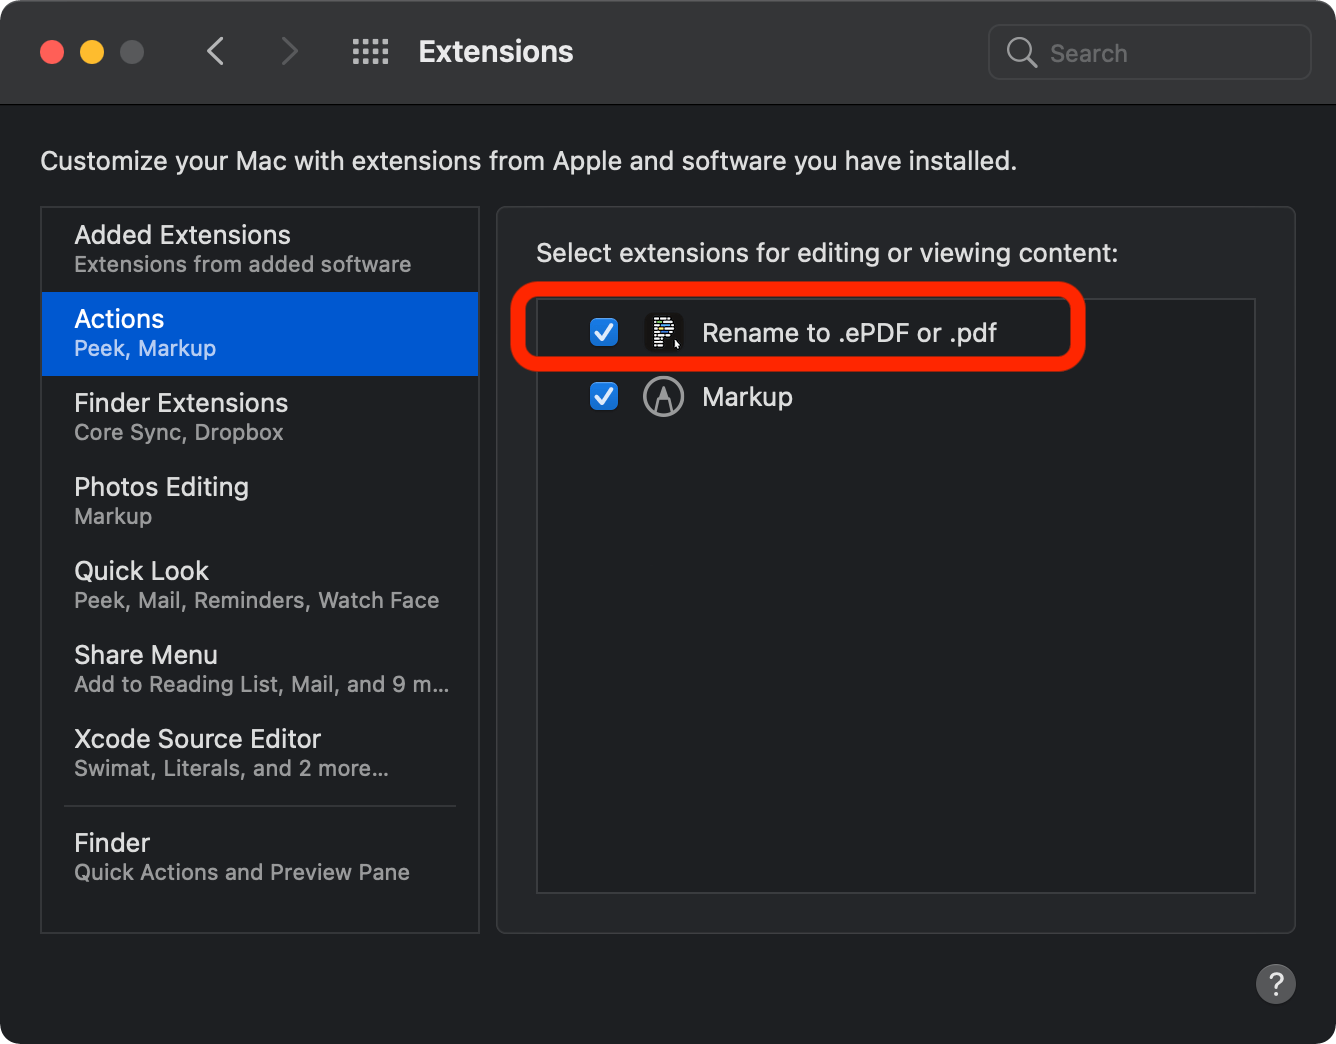 System Preferences > Extensions: Actions